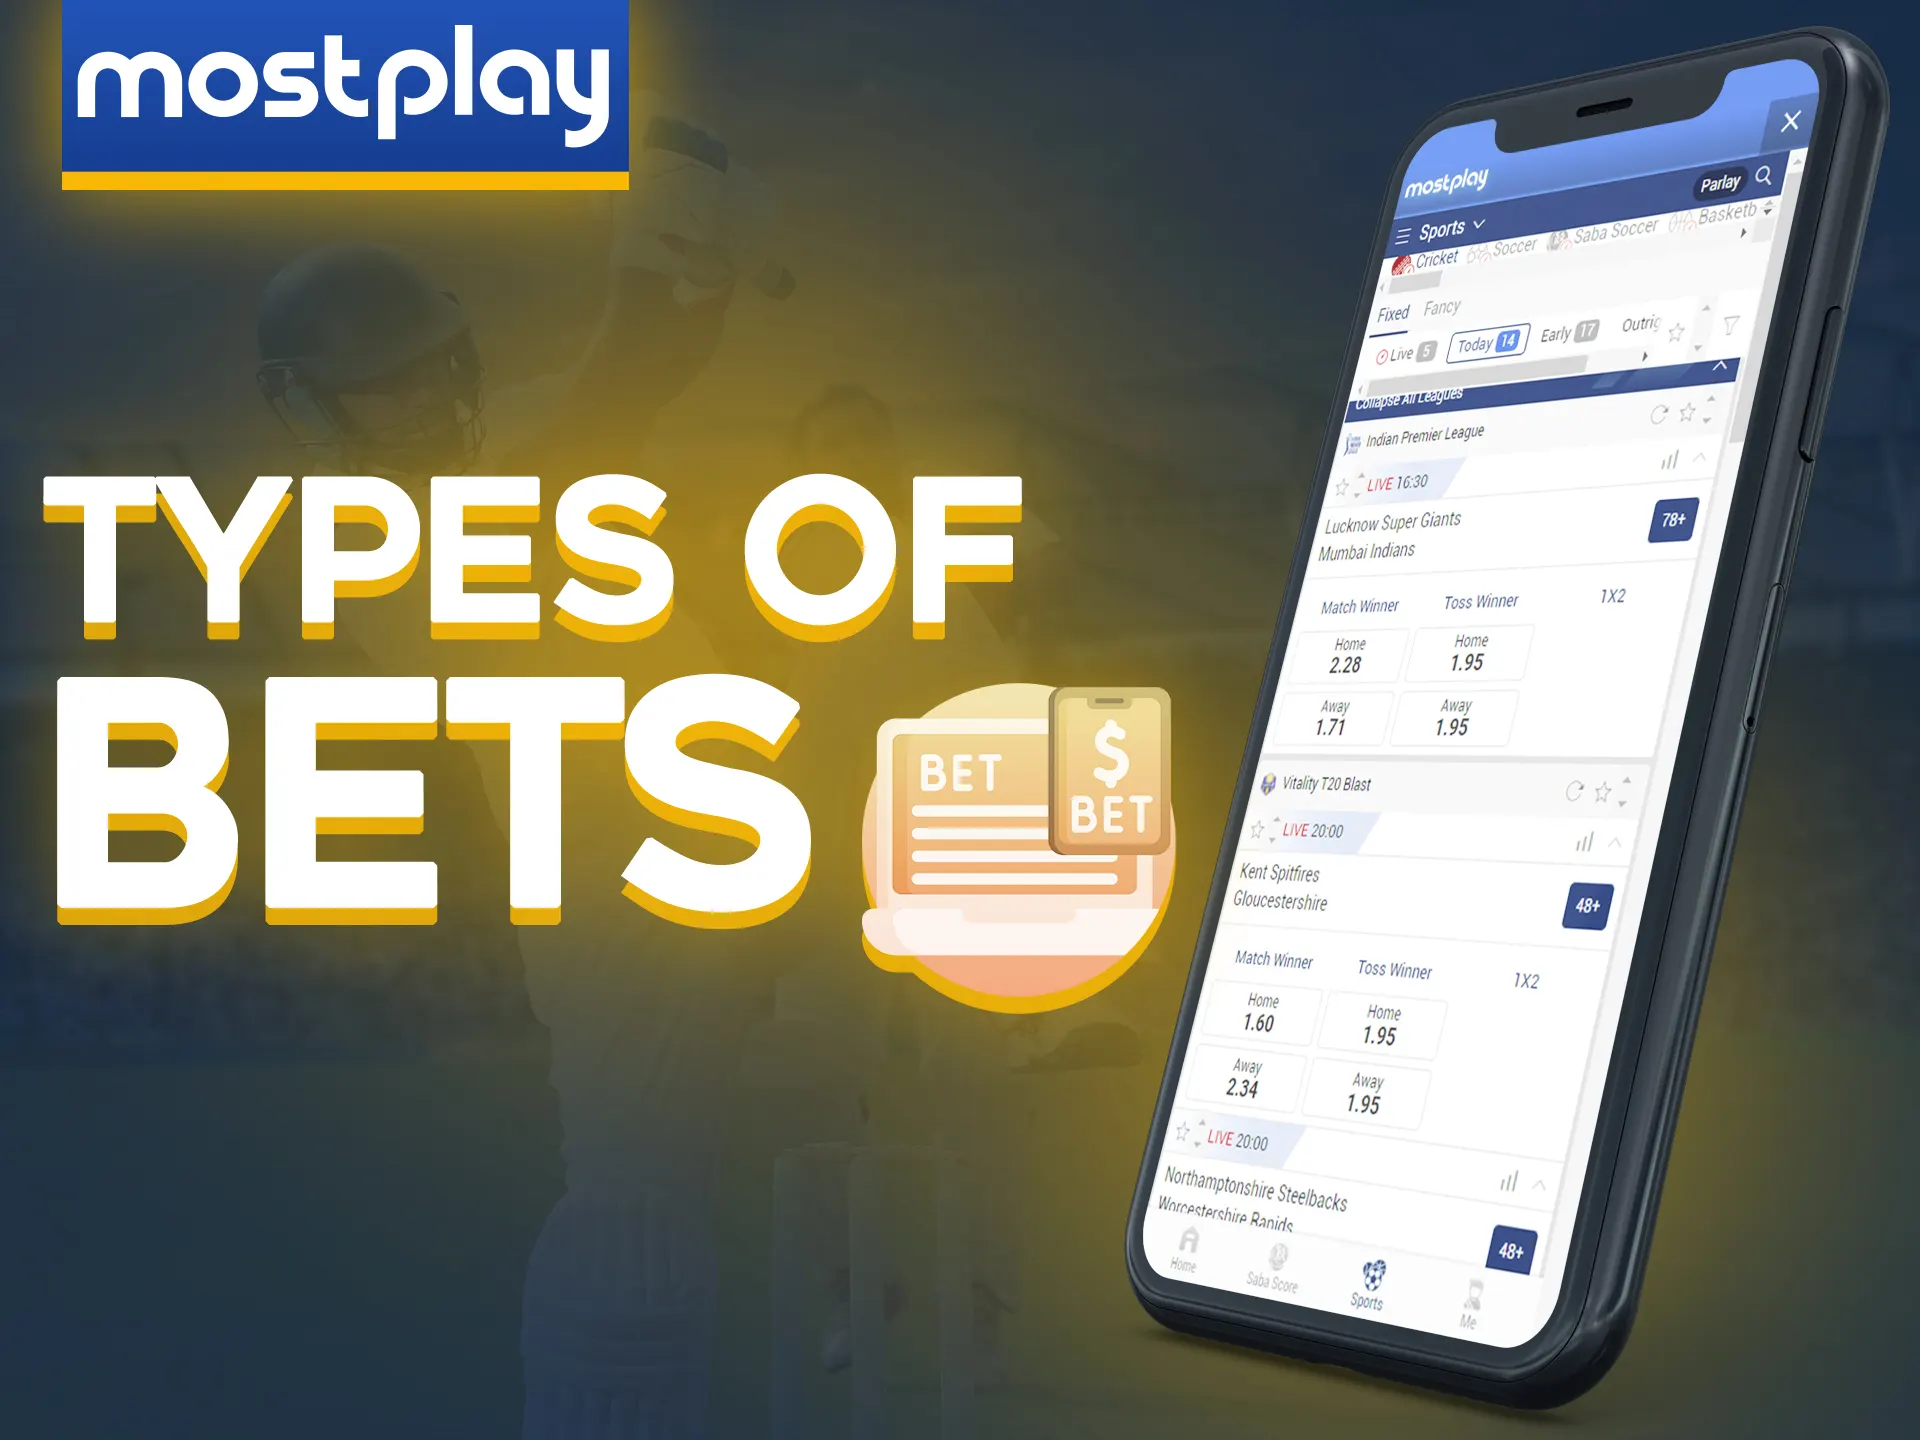 Learn more about the different types of bets in the Mostplay app.